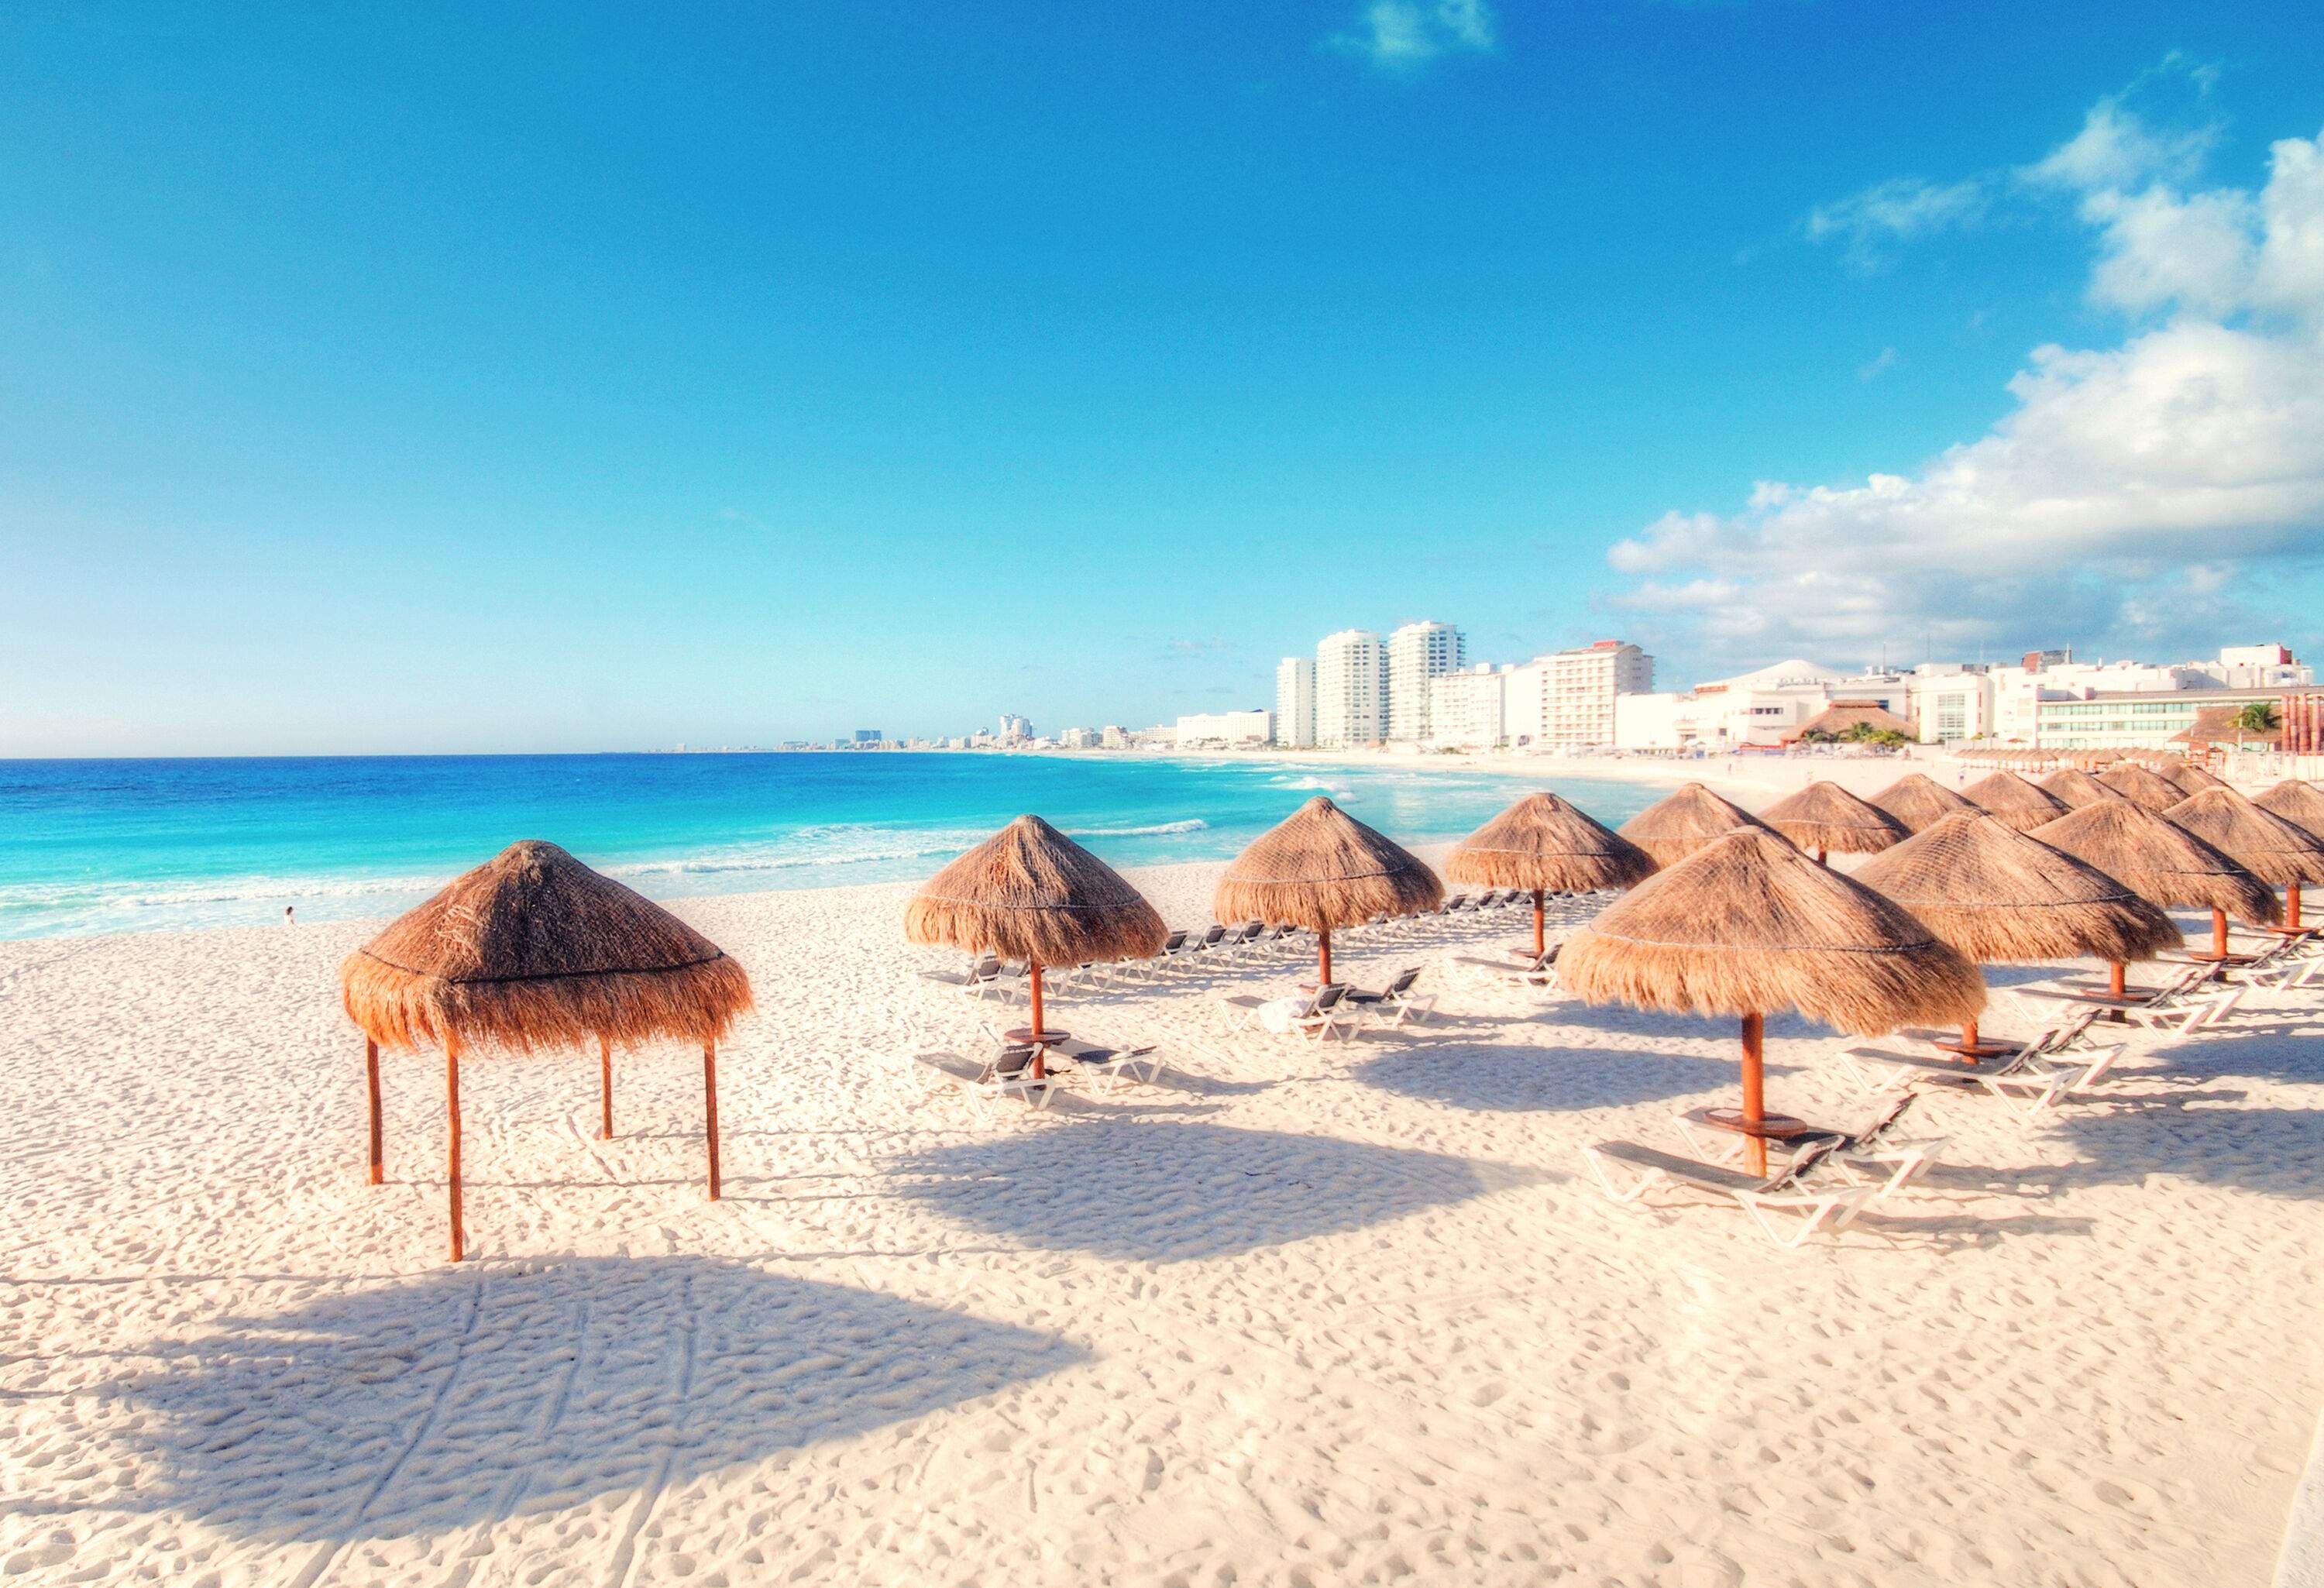 Sun loungers and thatched umbrellas lining a white beach with fine sand.